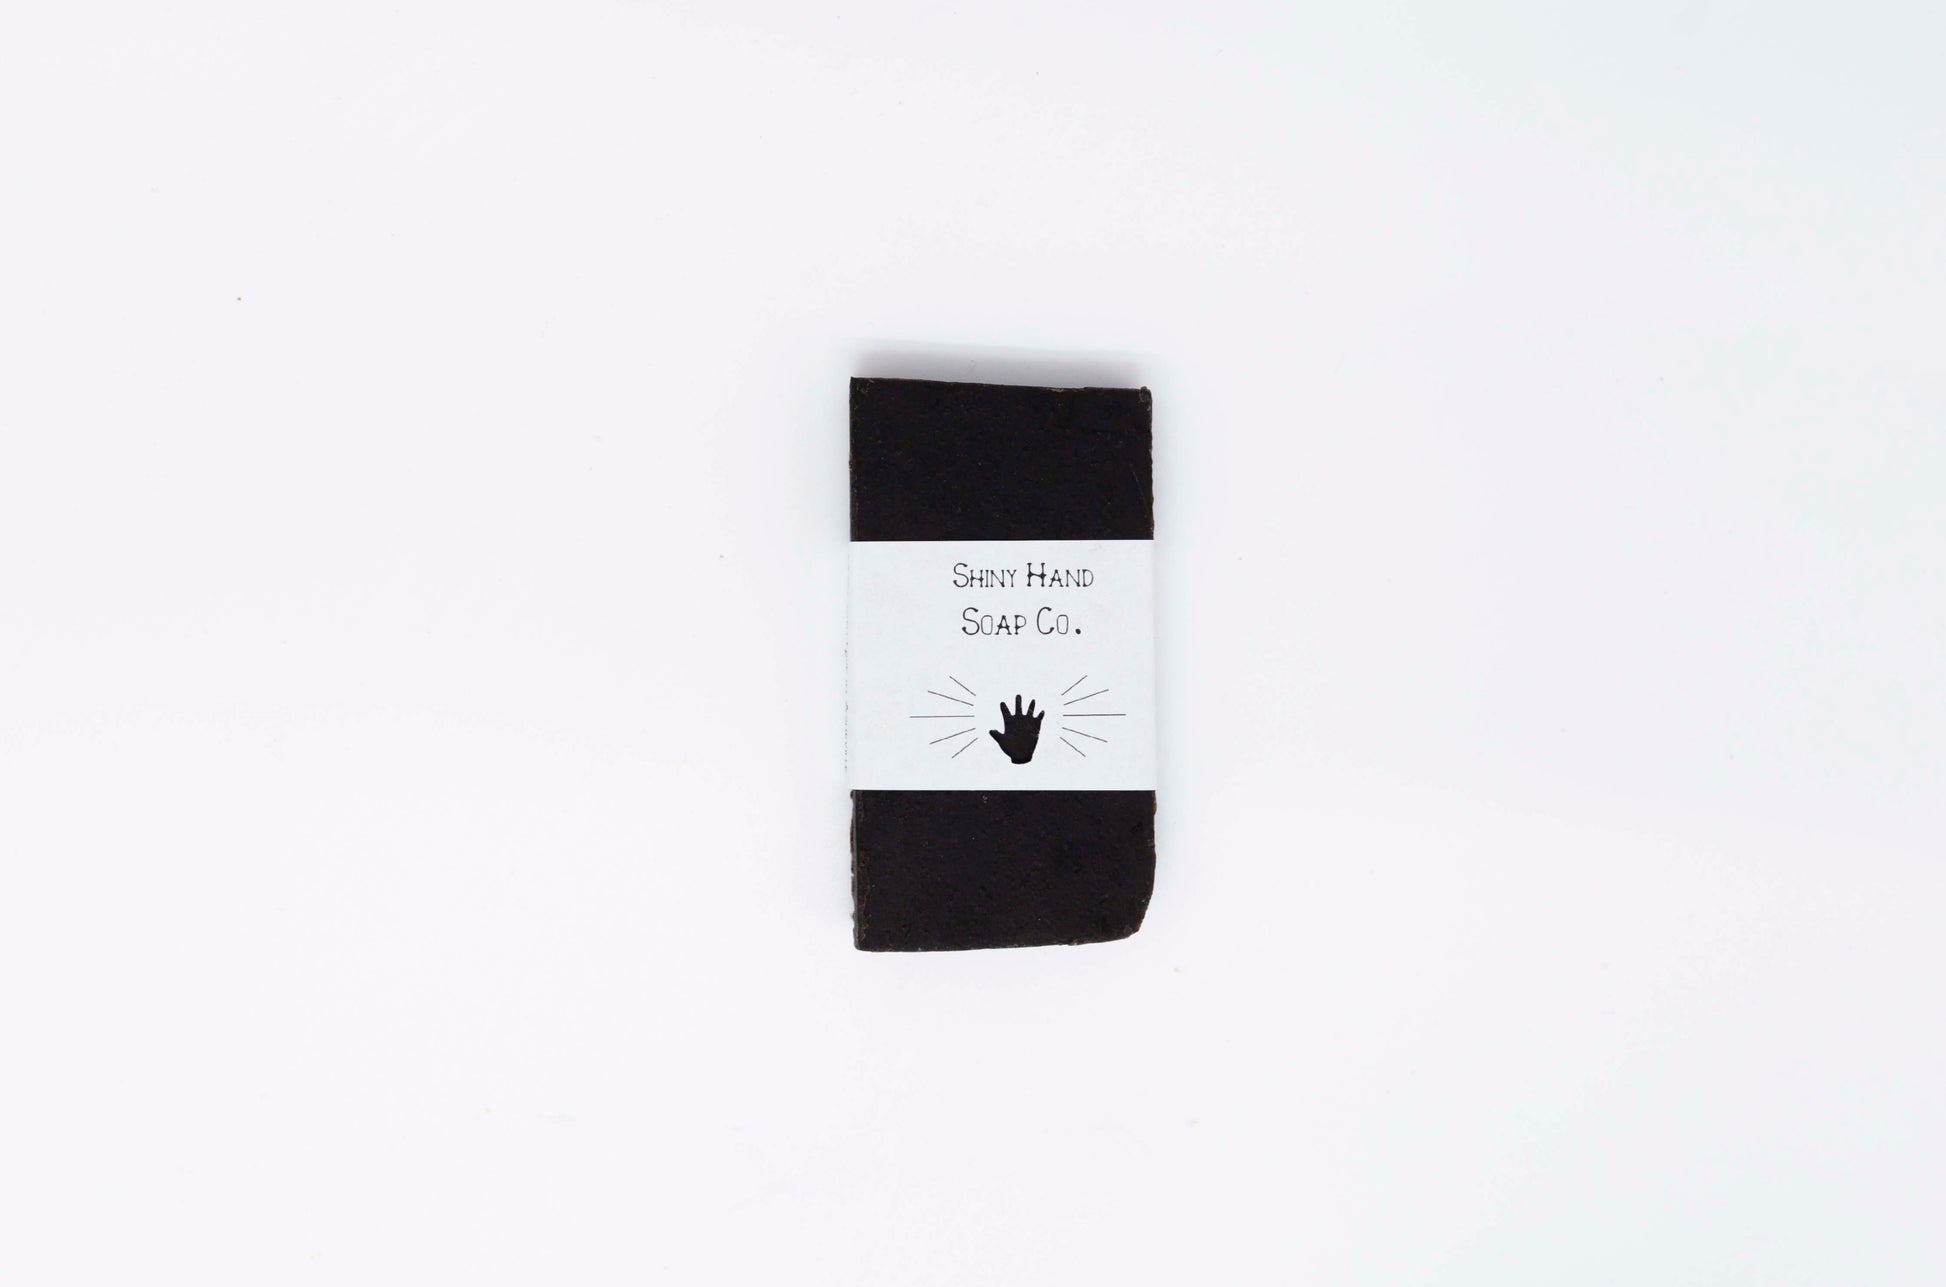 A charcoal black midnight anise soap sample wrapped in crisp white recycled paper wrapper with a hand shaped cutout rests on a clean white backdrop.